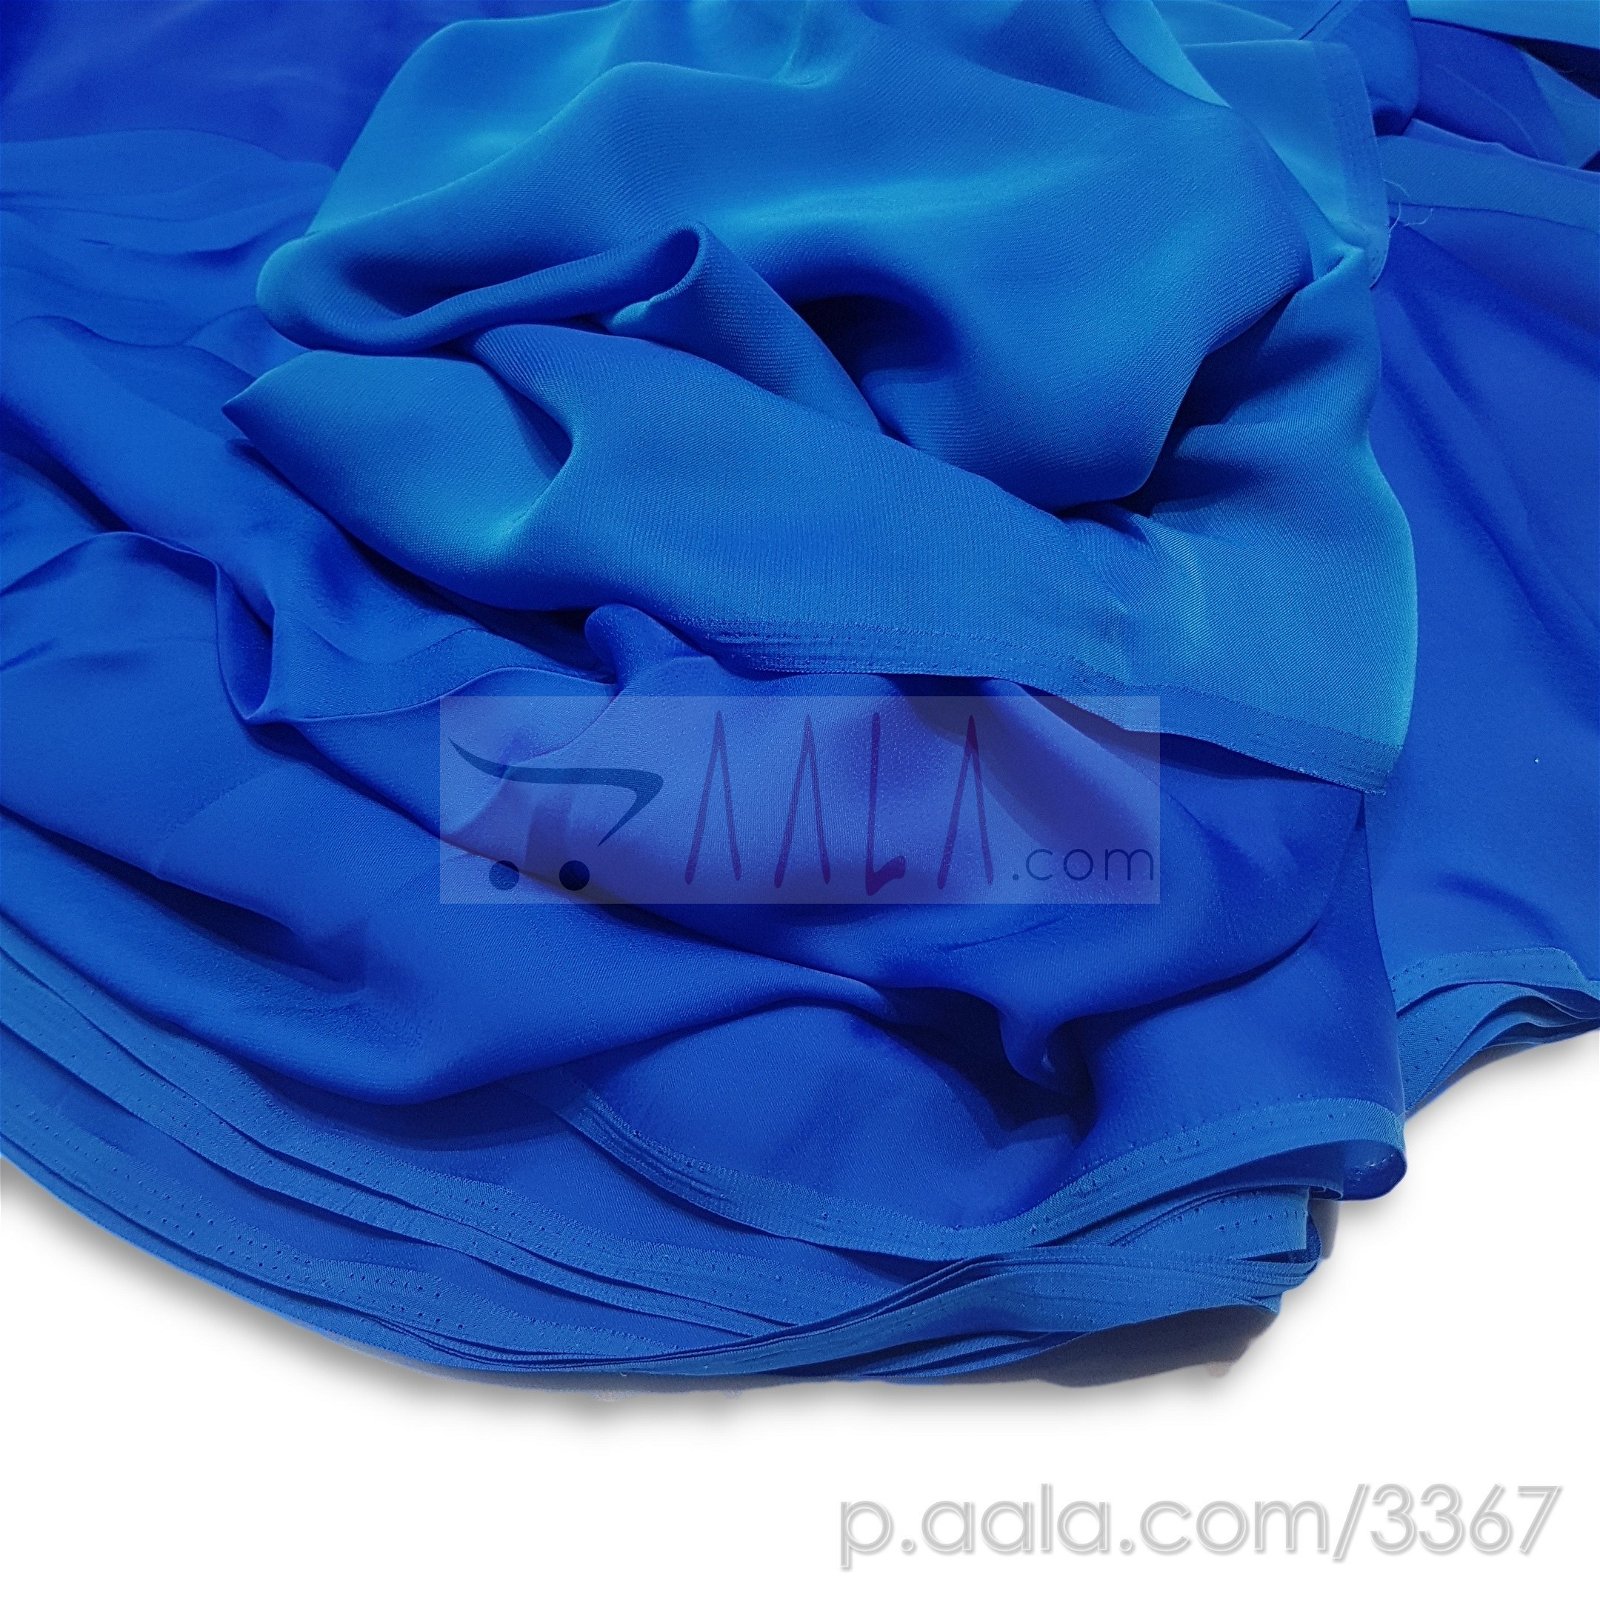 Metallic Satin Georgette Poly-ester 44 Inches Dyed Per Metre #3367